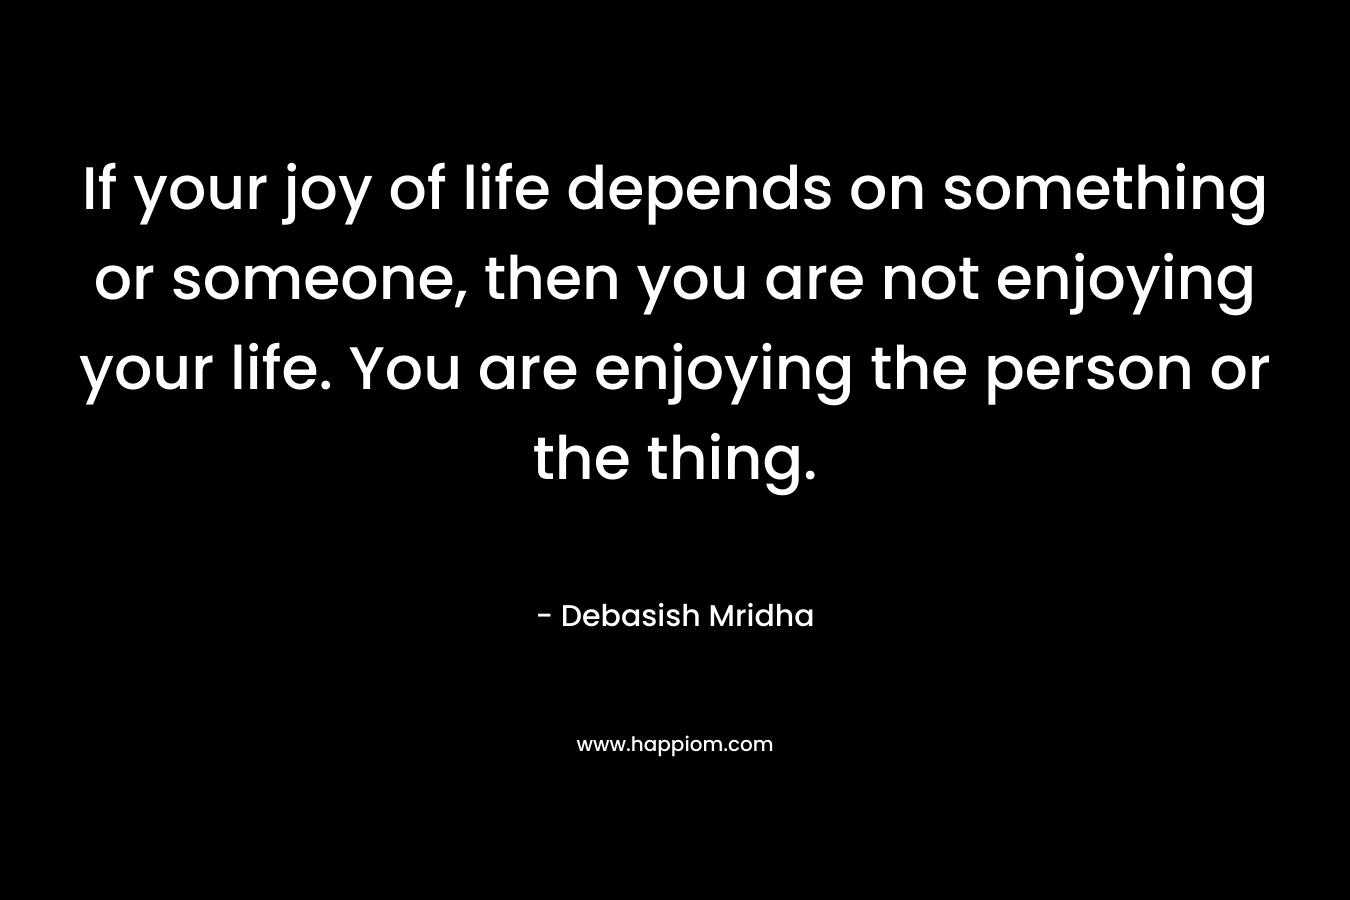 If your joy of life depends on something or someone, then you are not enjoying your life. You are enjoying the person or the thing.